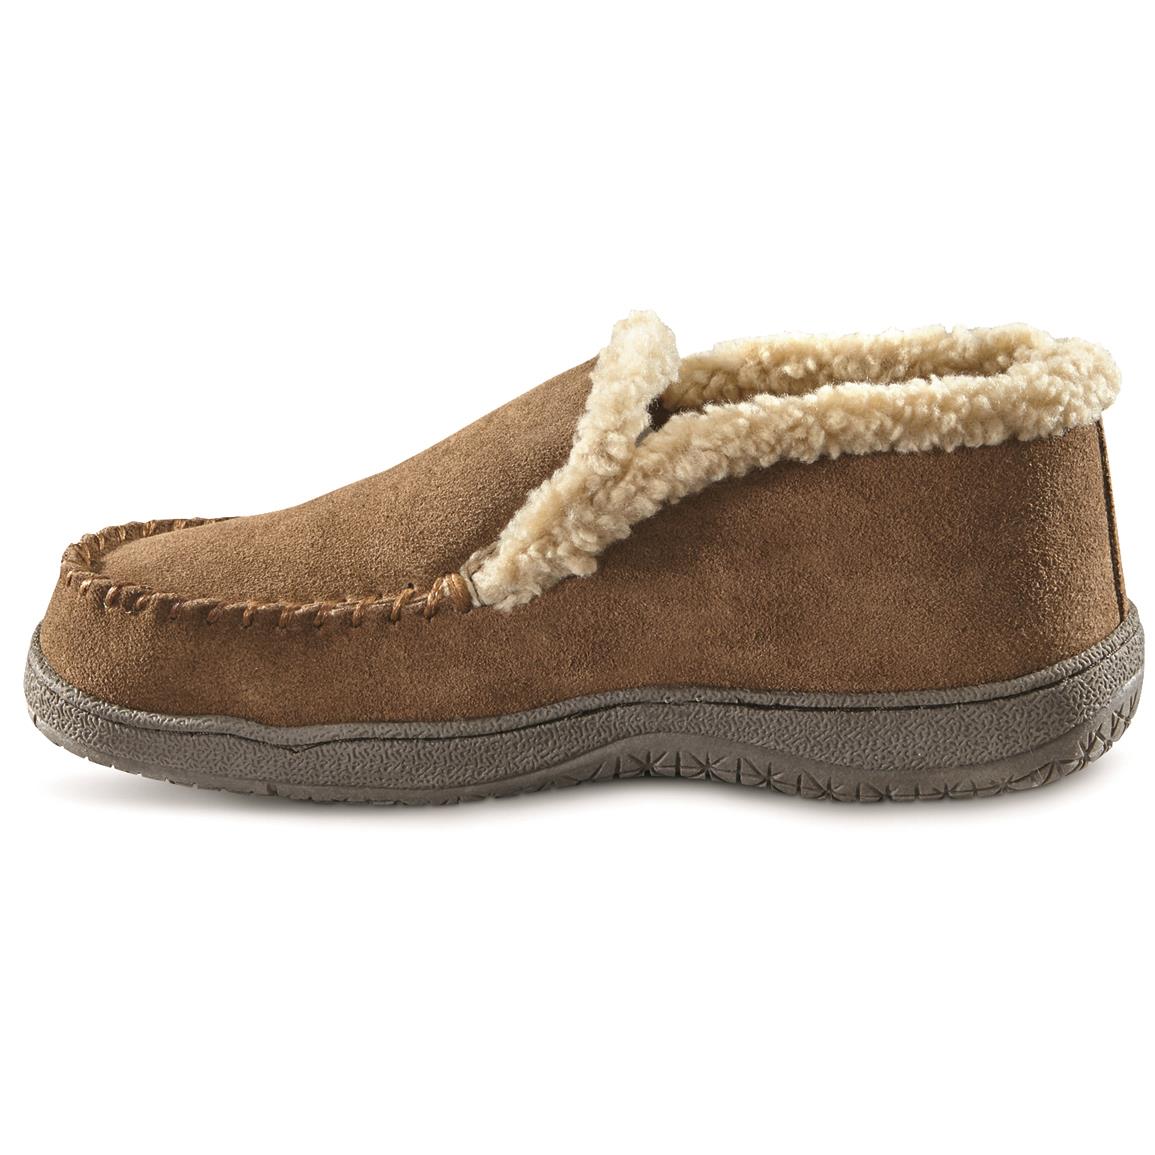 Outdoor Sherpa Shoes | Sportsman's Guide